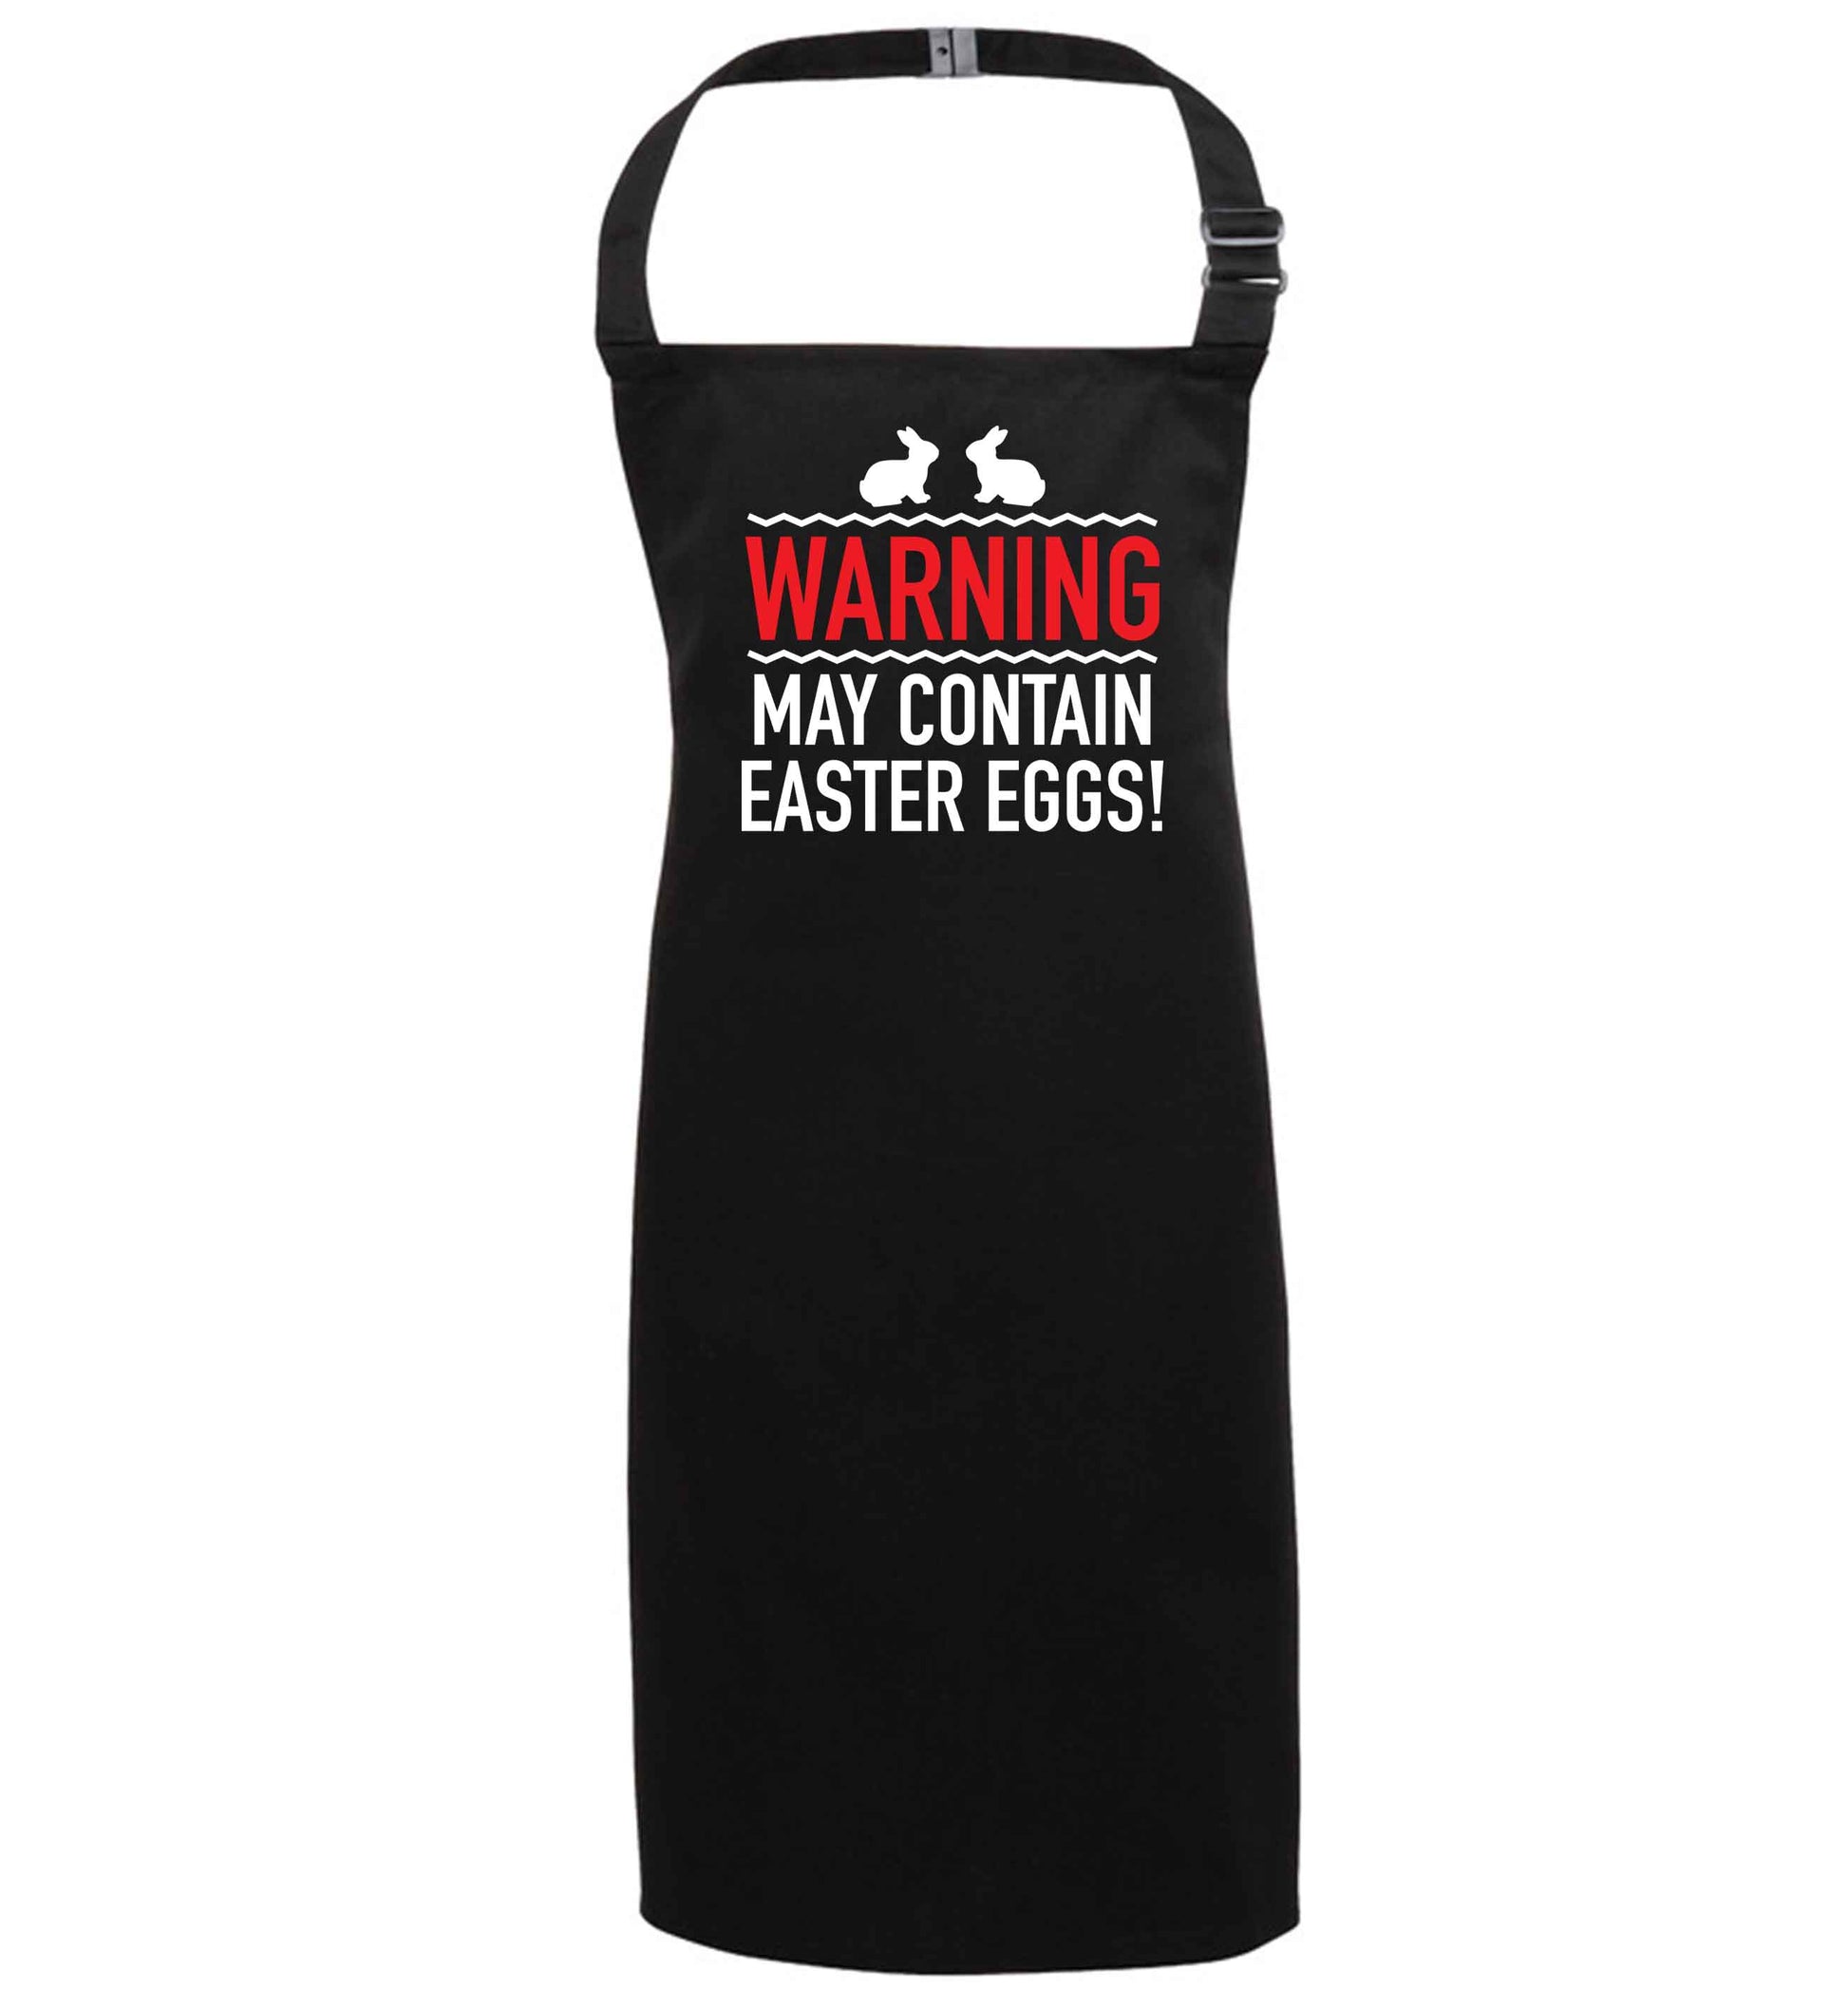 Warning may contain Easter eggs black apron 7-10 years